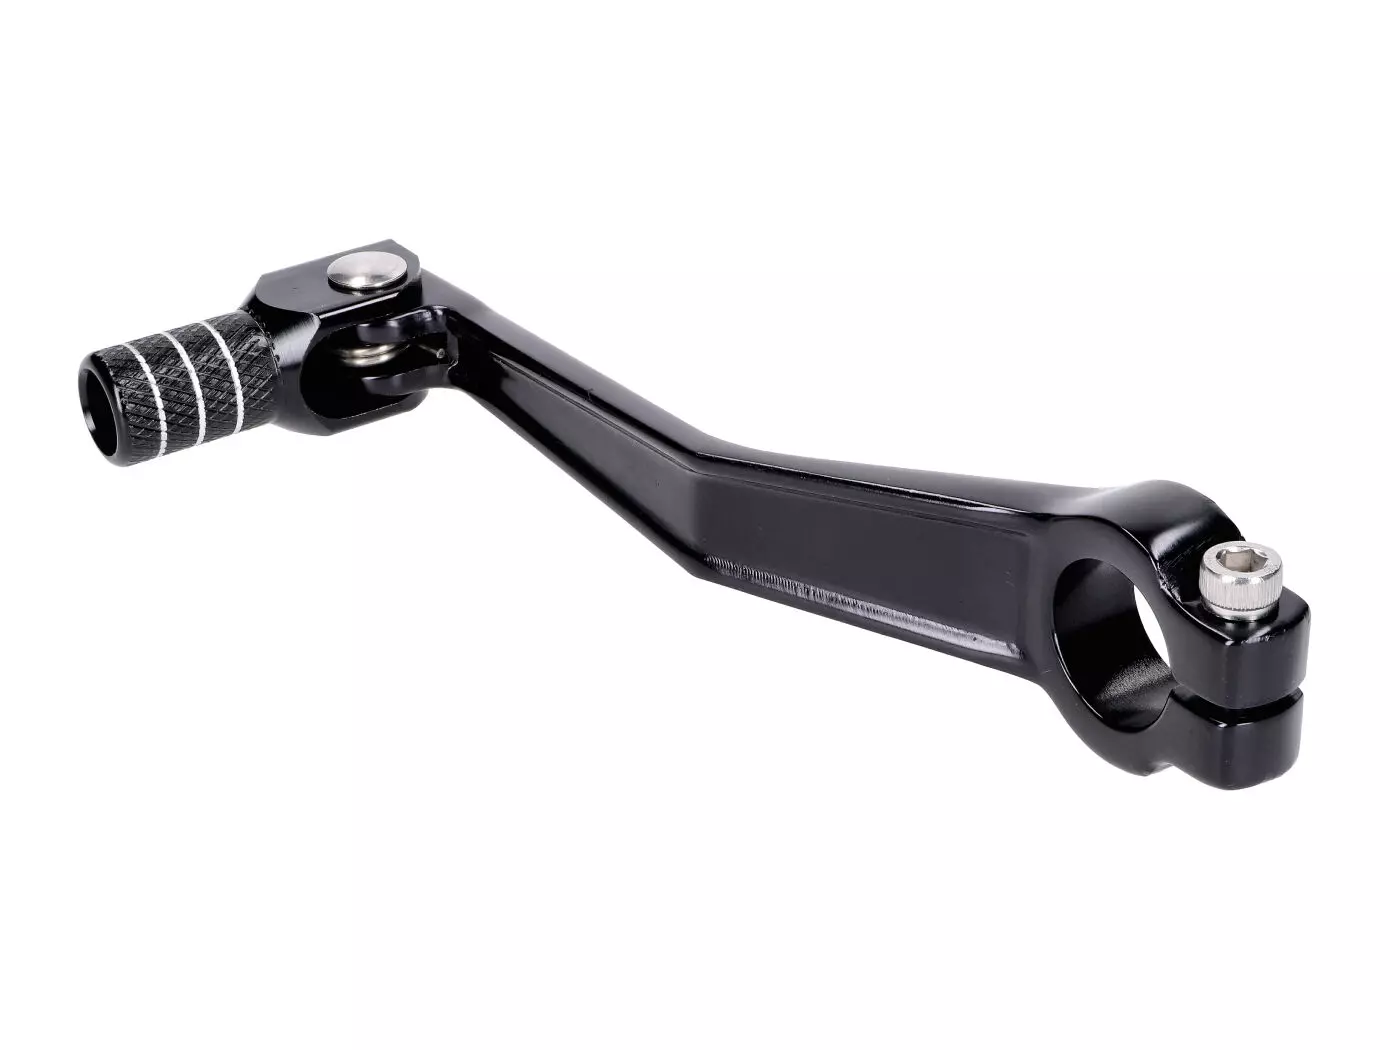 Gear Shift Lever Foldable, Anodized Aluminum, Black For Simson S50, S51, S53, S70, S83